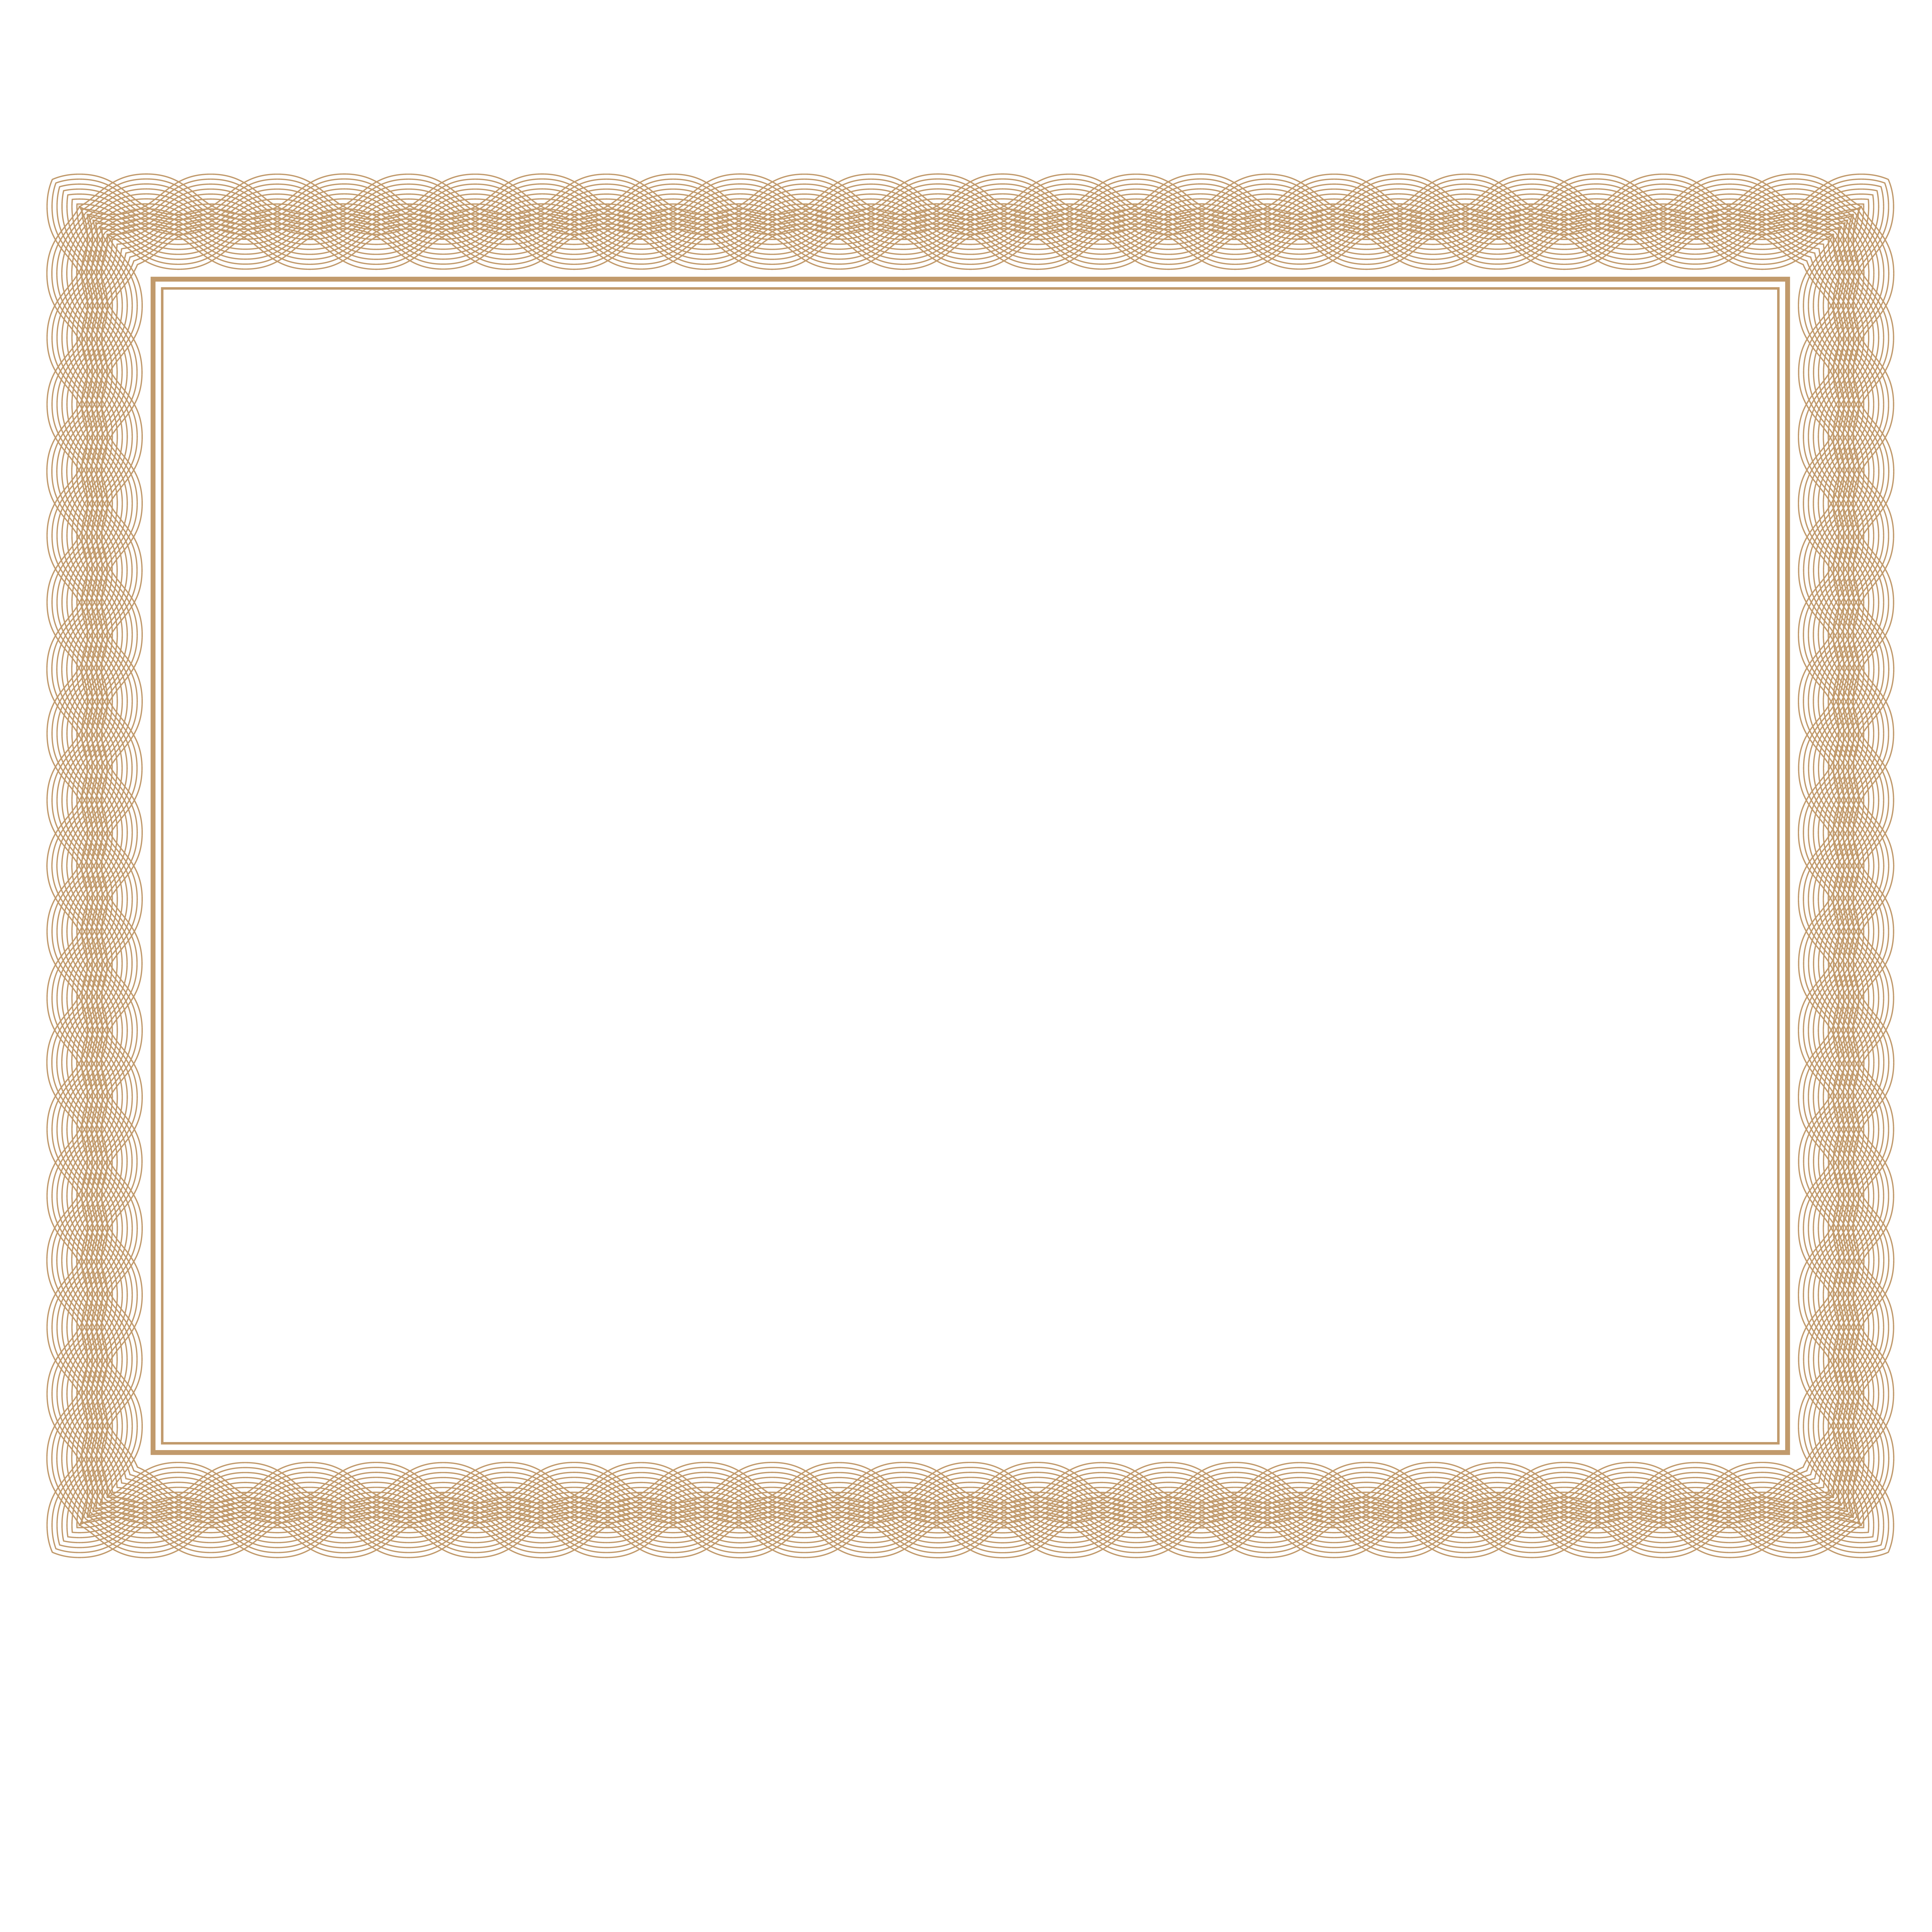 Certificate Frame PNG Free Download